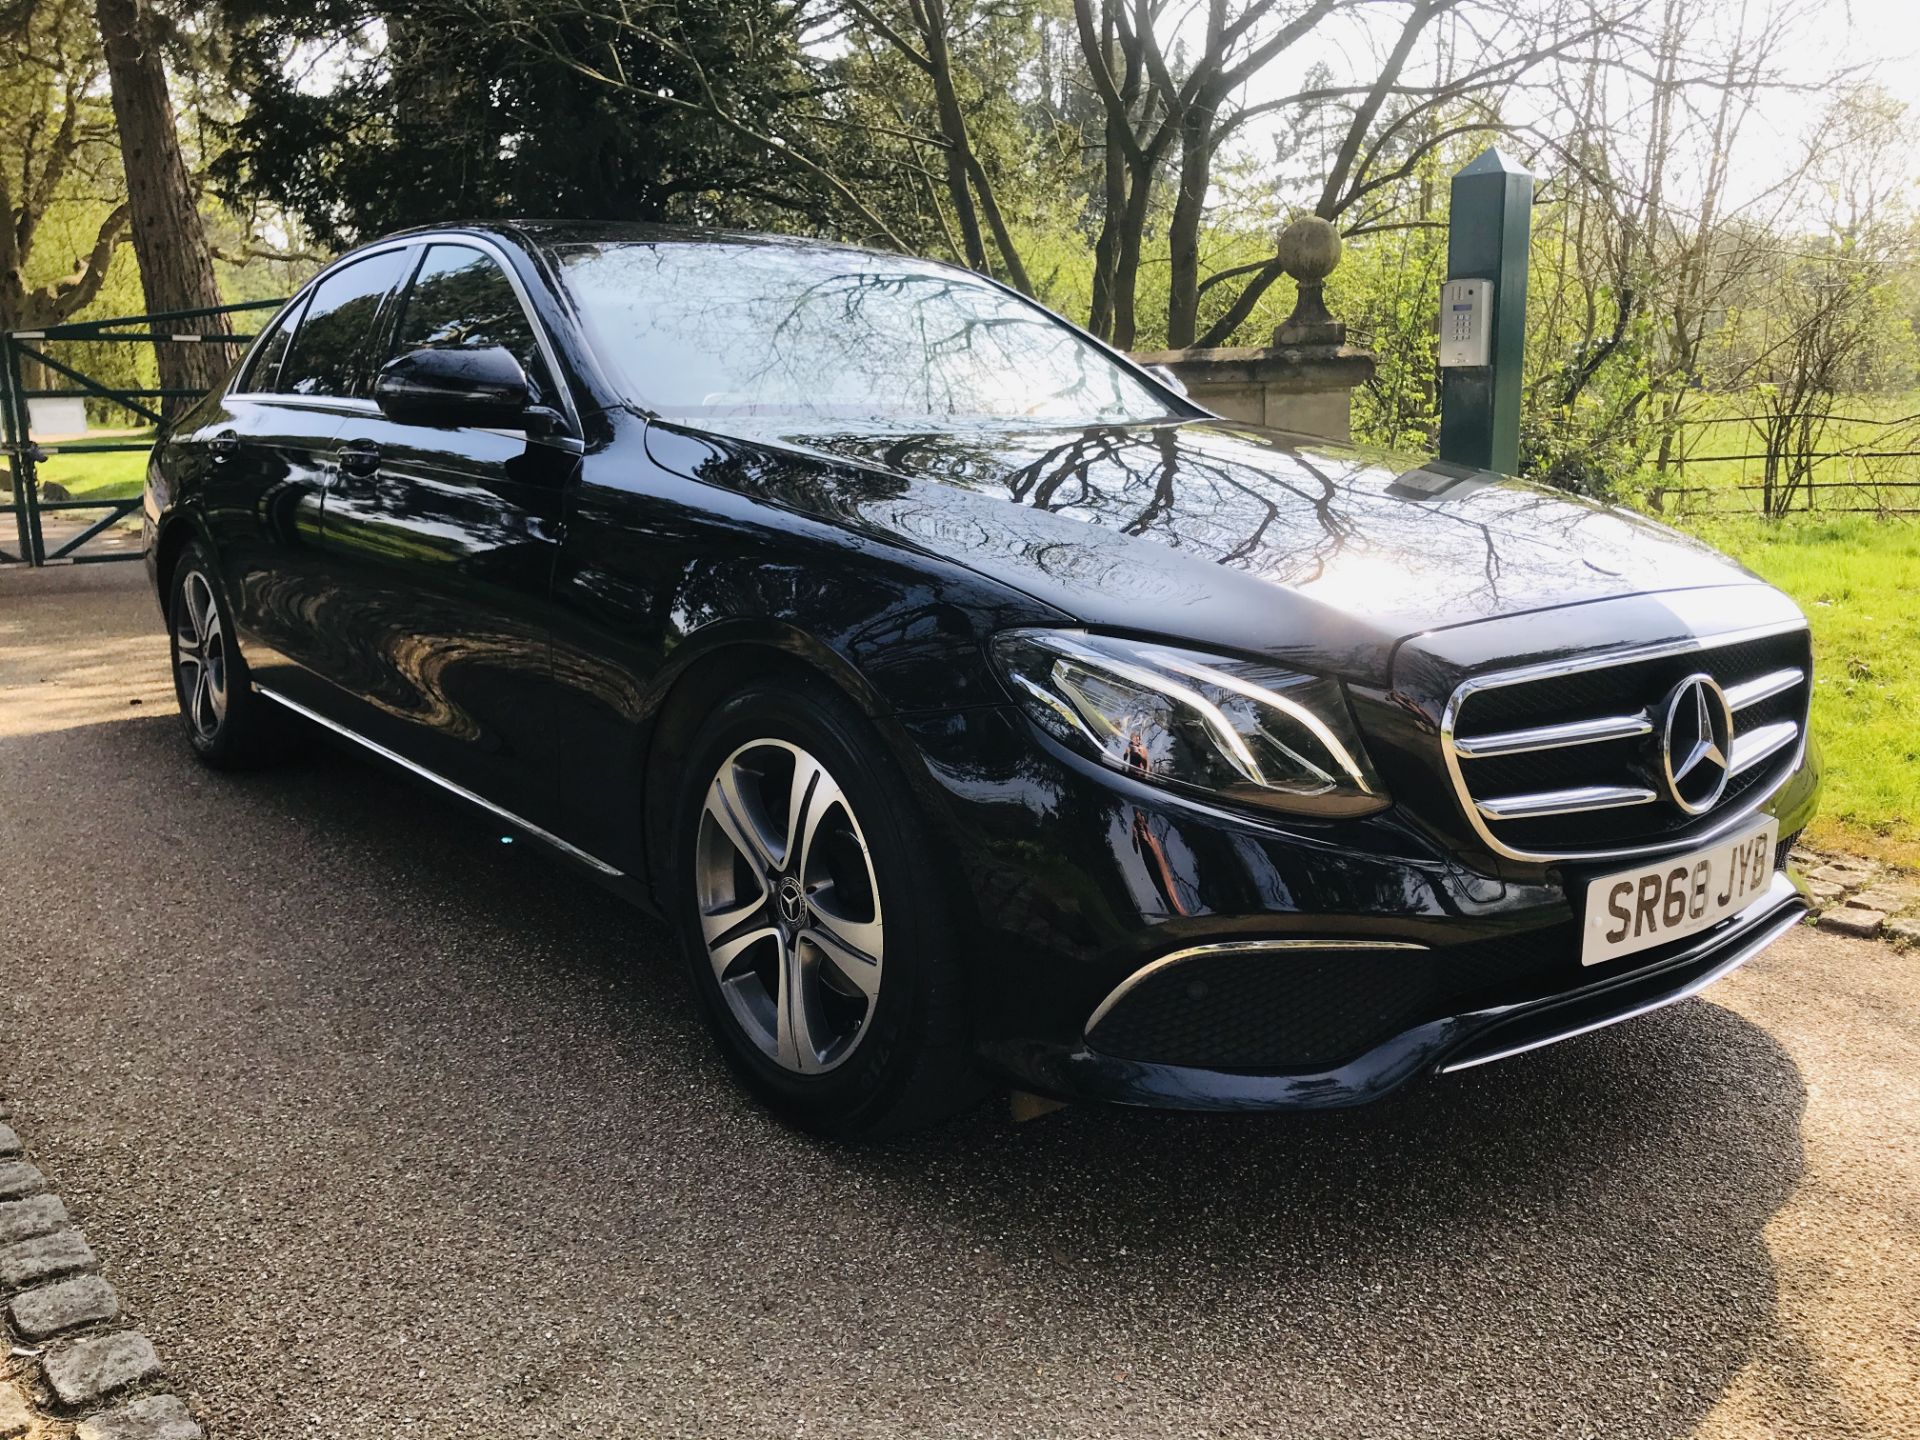 On Sale MERCEDES E220d "SPECIAL EQUIPMENT" 9G TRONIC (2019 MODEL) 1 OWNER - SAT NAV - LEATHER - WOW! - Image 3 of 26